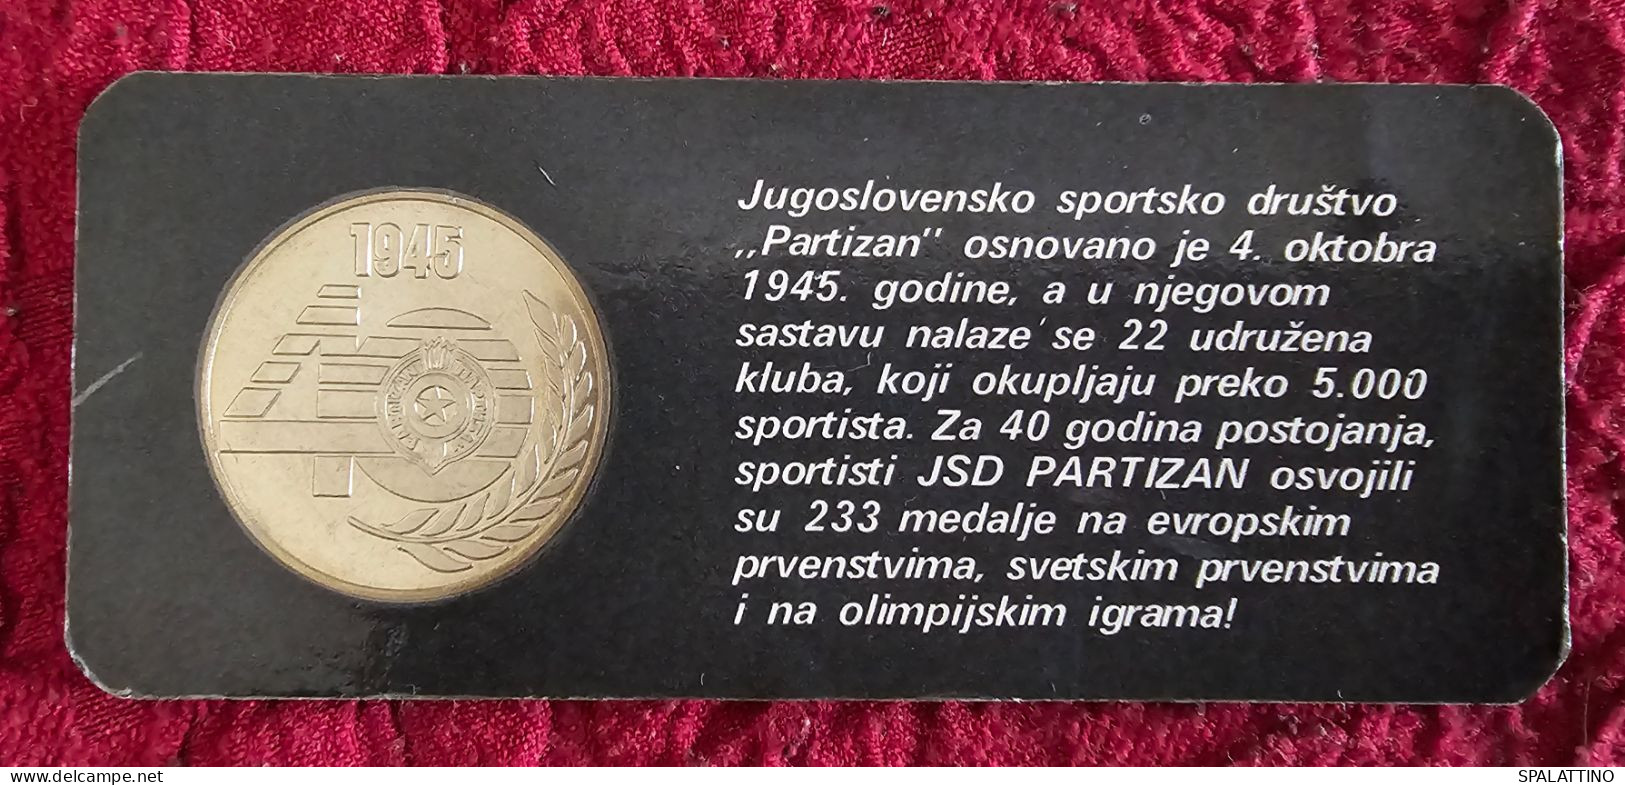 FK PARTIZAN MEDAL IN BLISTER - Apparel, Souvenirs & Other